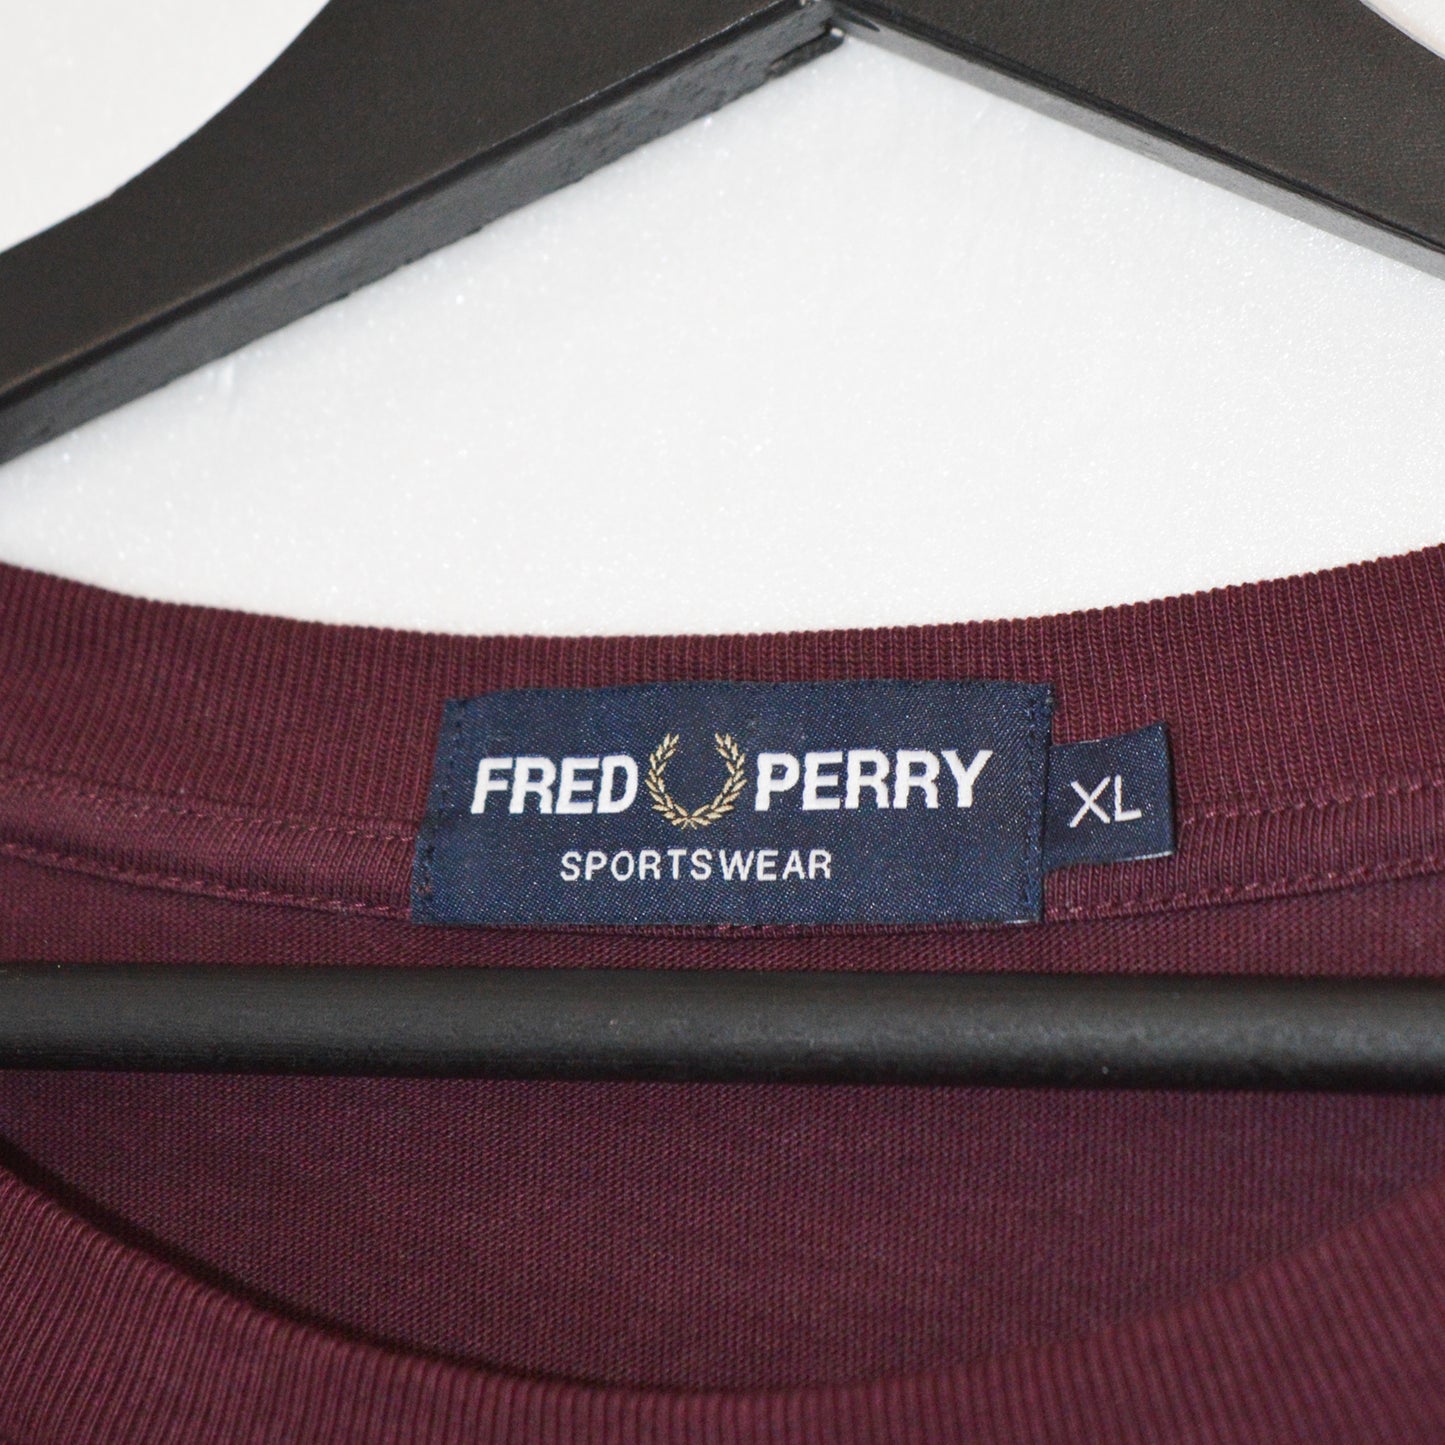 FRED PERRY ГОРНИЩЕ (XL)